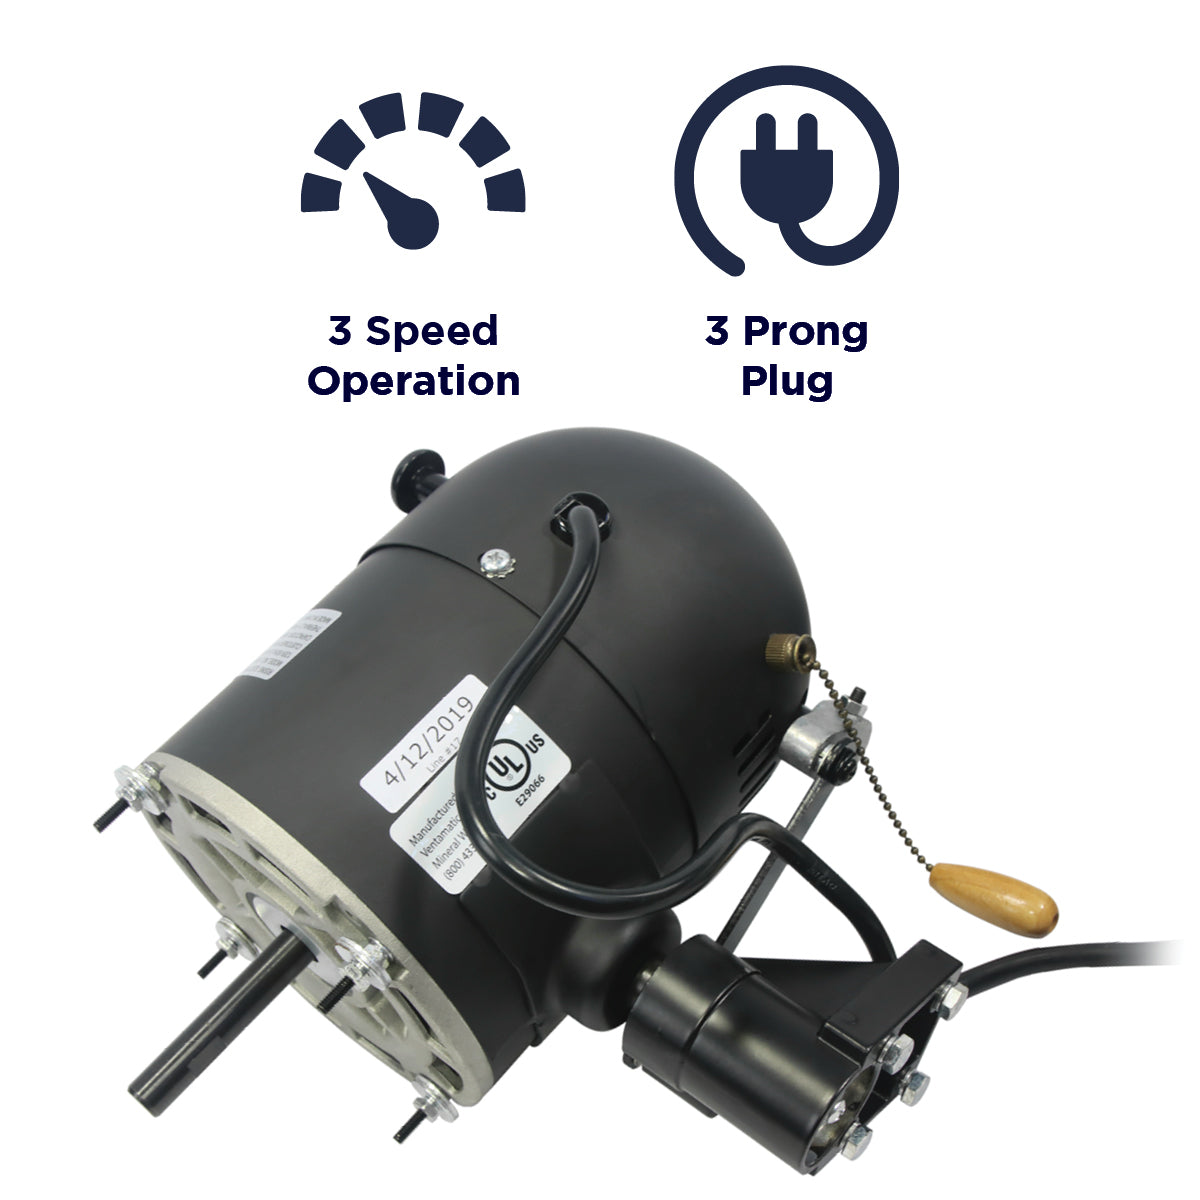 Features of the XE300351 include a 3 speed operation and a 3 prong plug.